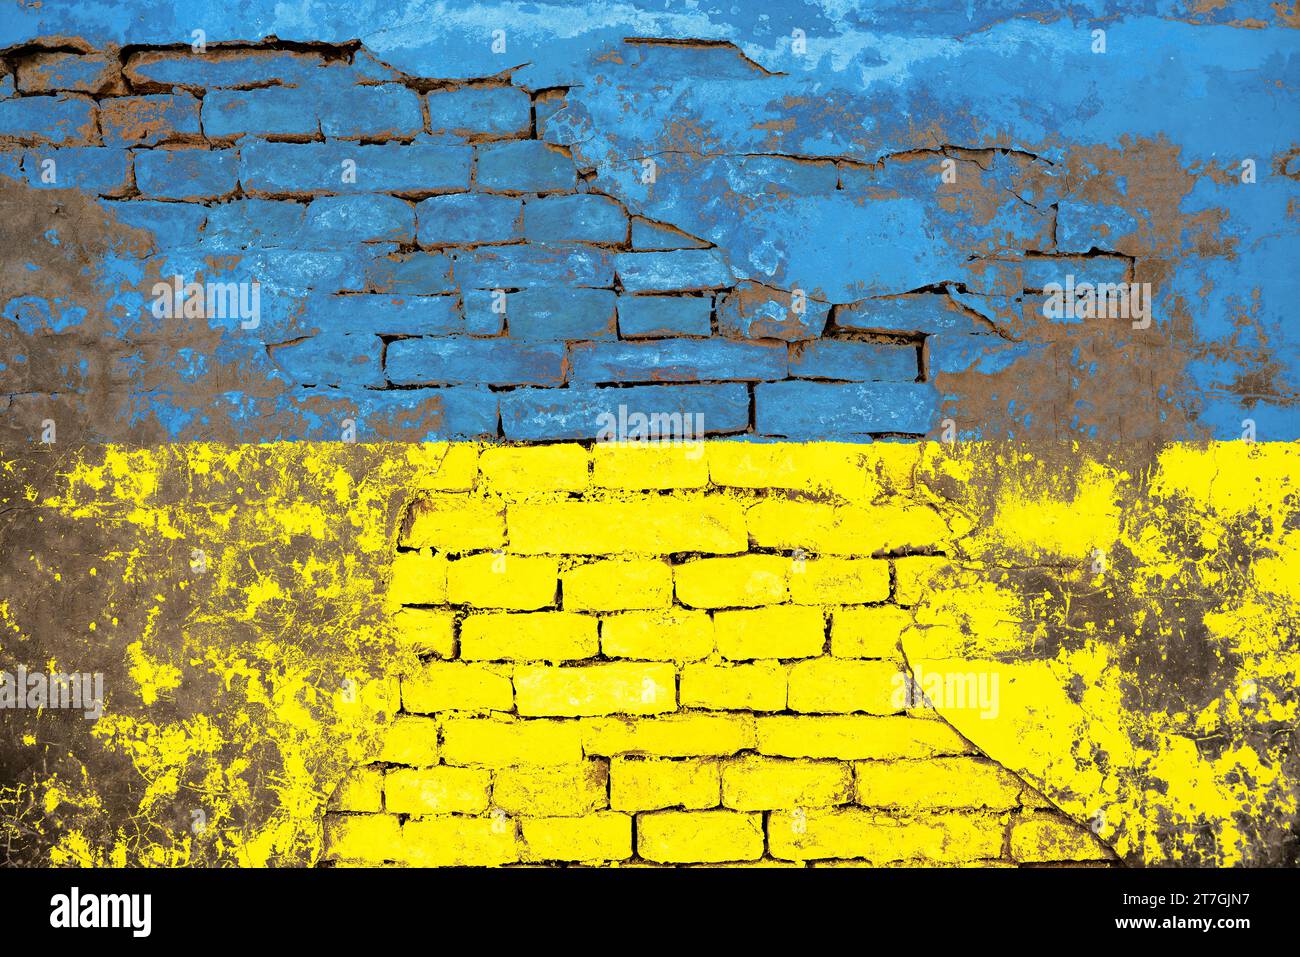 National flag of Ukraine painted on old brick wall Stock Photo